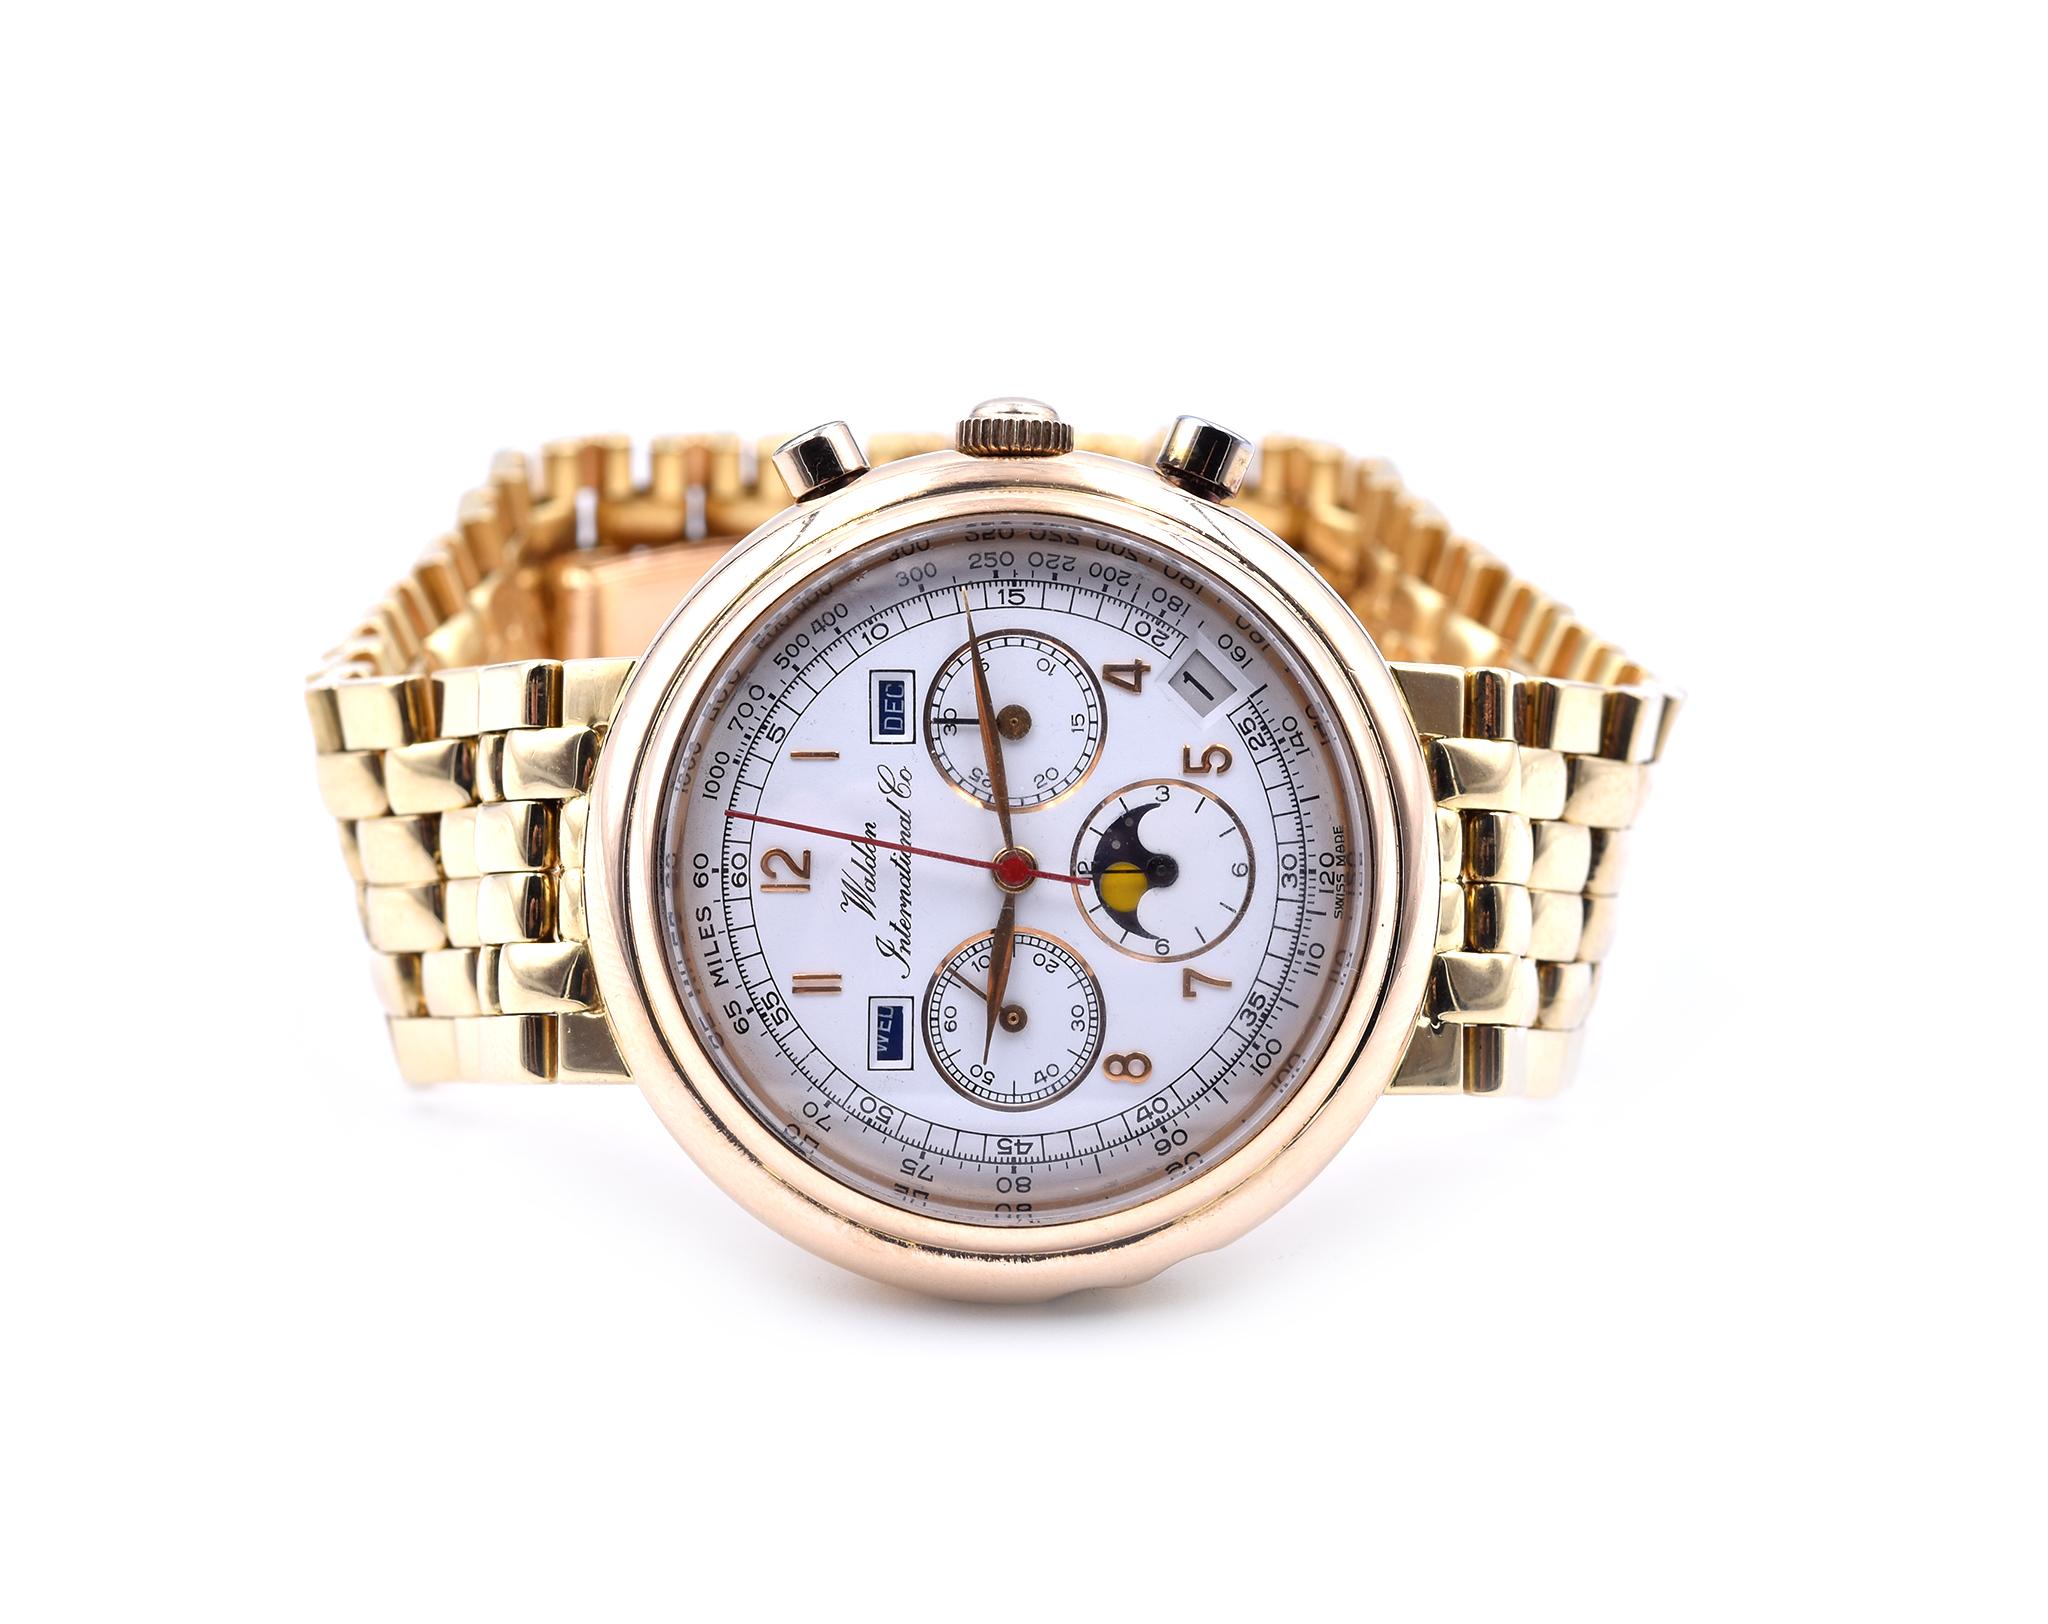 Movement: automatic
Function: hours, minutes, seconds, date, weekday, tachometer scale, lunar calendar, month 
Case: 39.5mm 18k yellow gold round case, sapphire crystal, pull/push crown, gold Arabic numbers
Band: 18k yellow gold bracelet
Dial: white